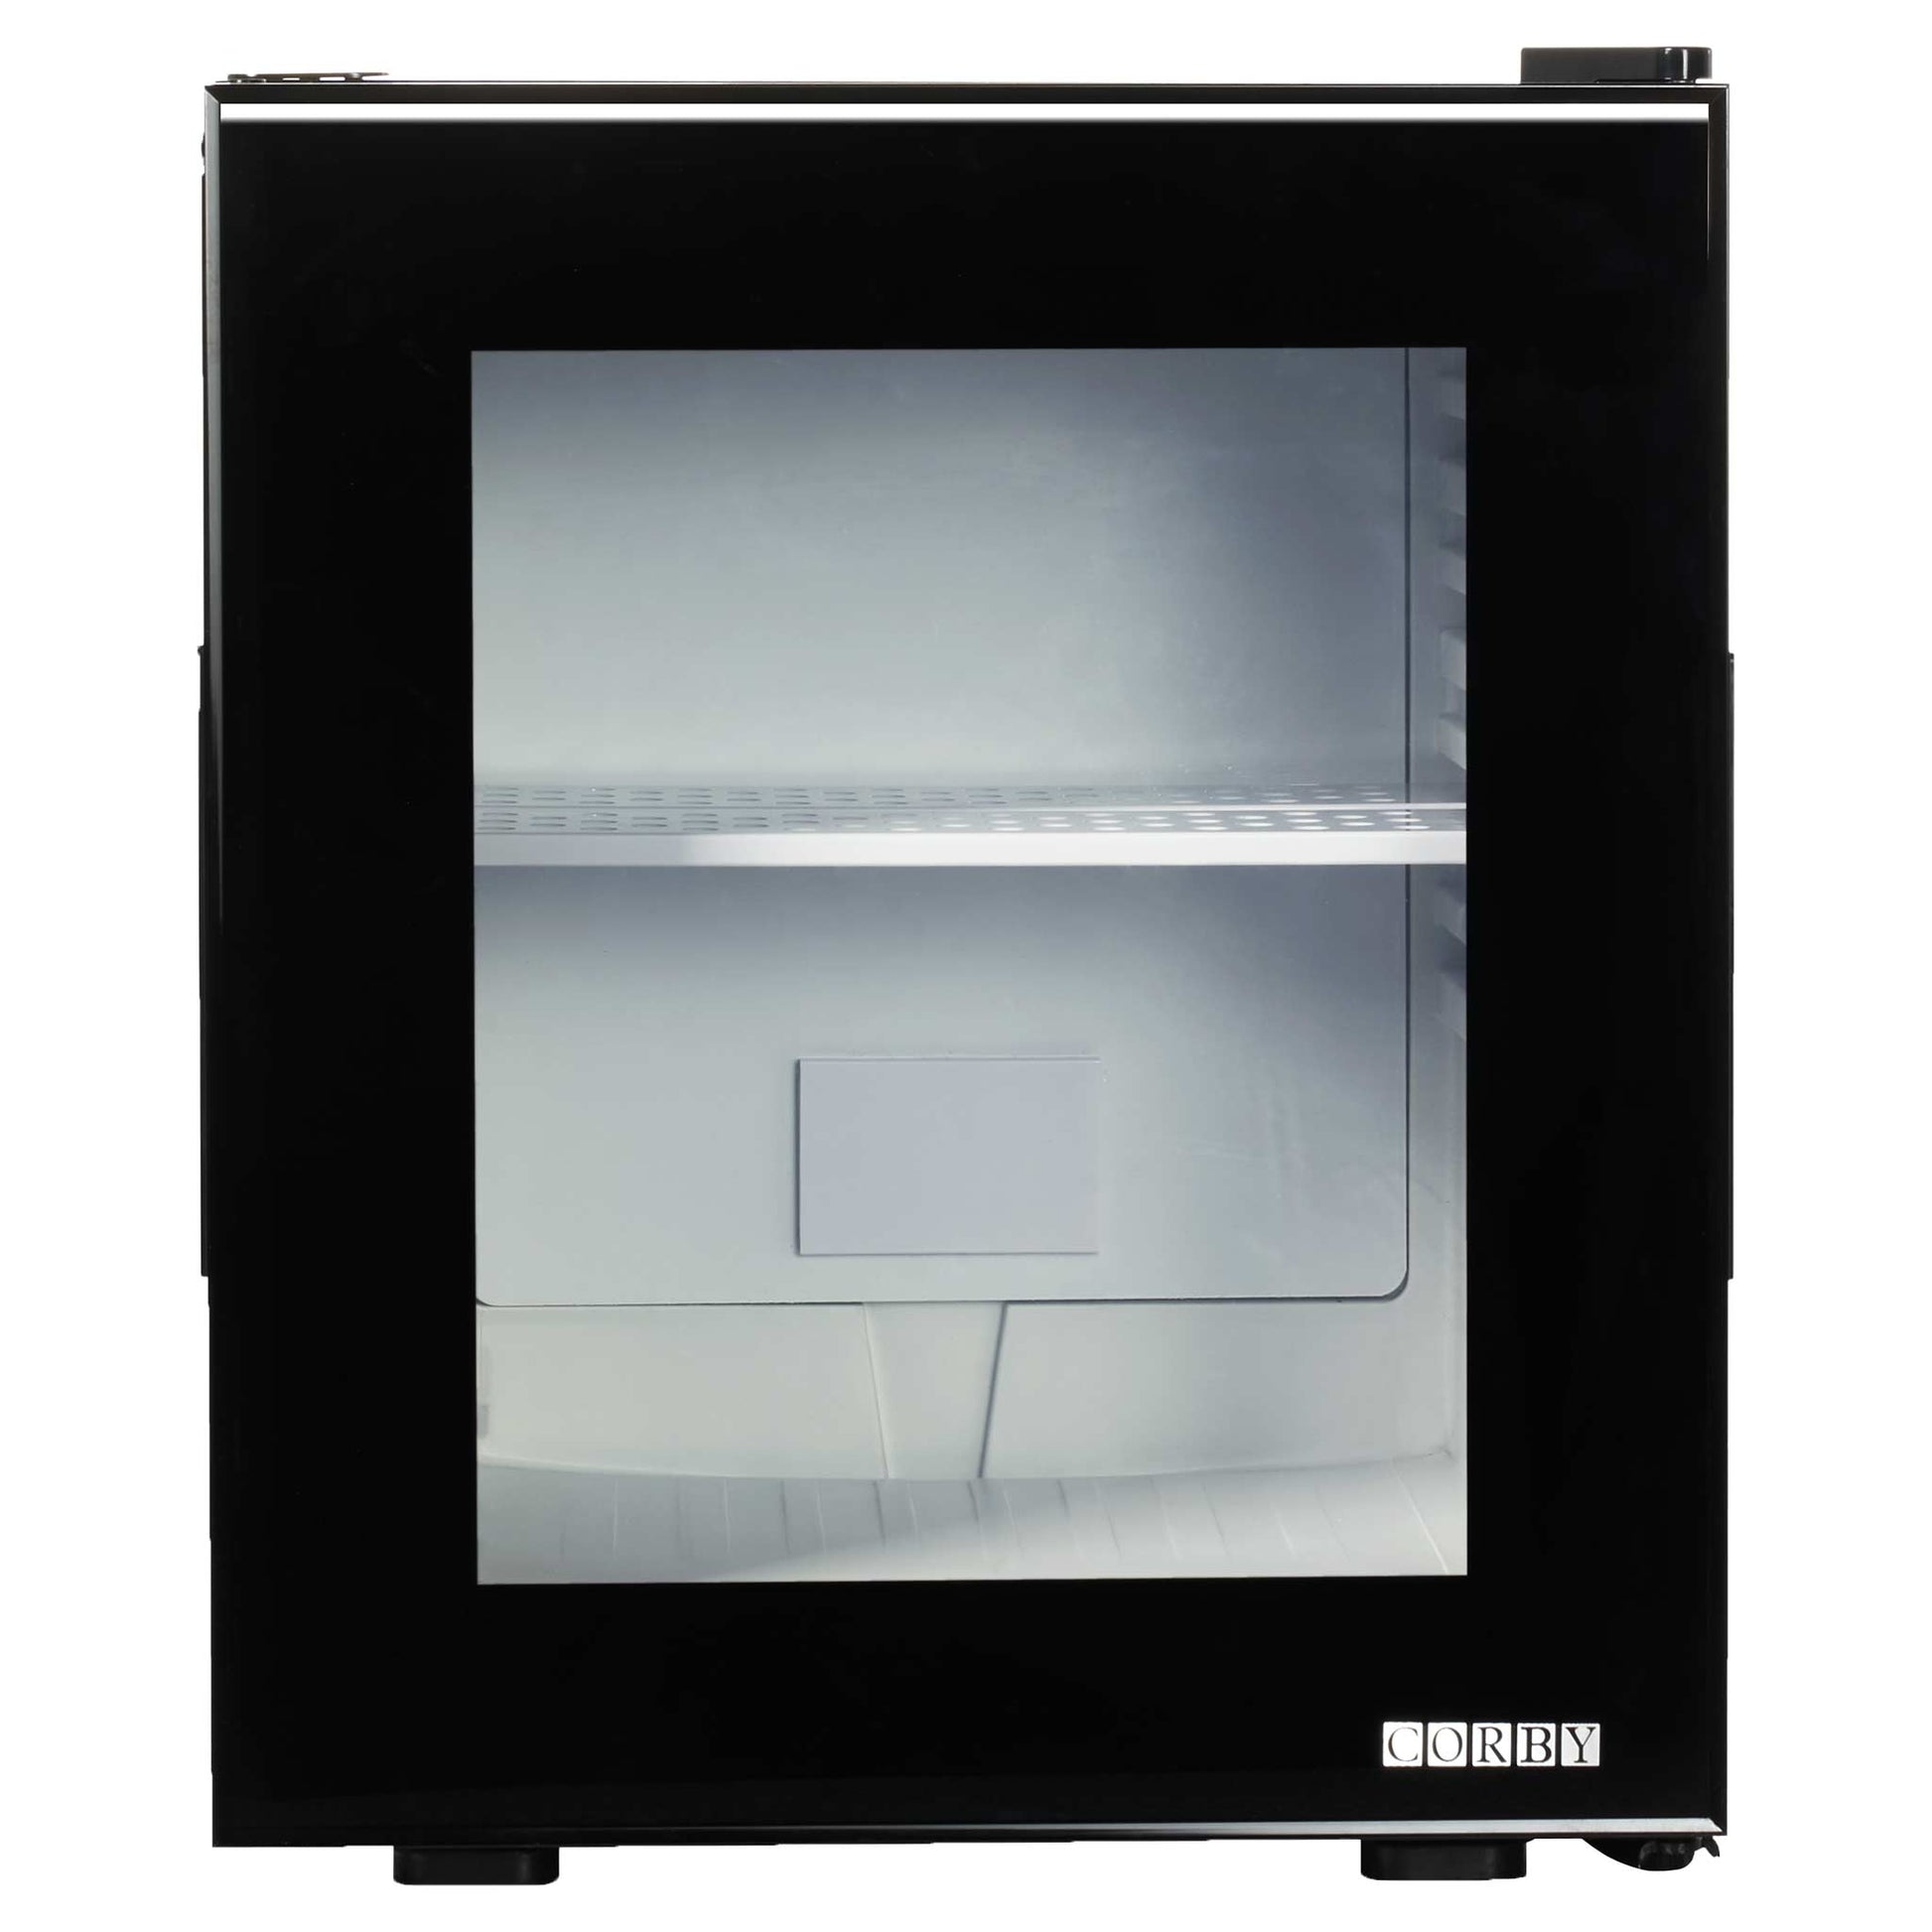 Corby of Windsor Eton 20 litre minibar with glass door front view